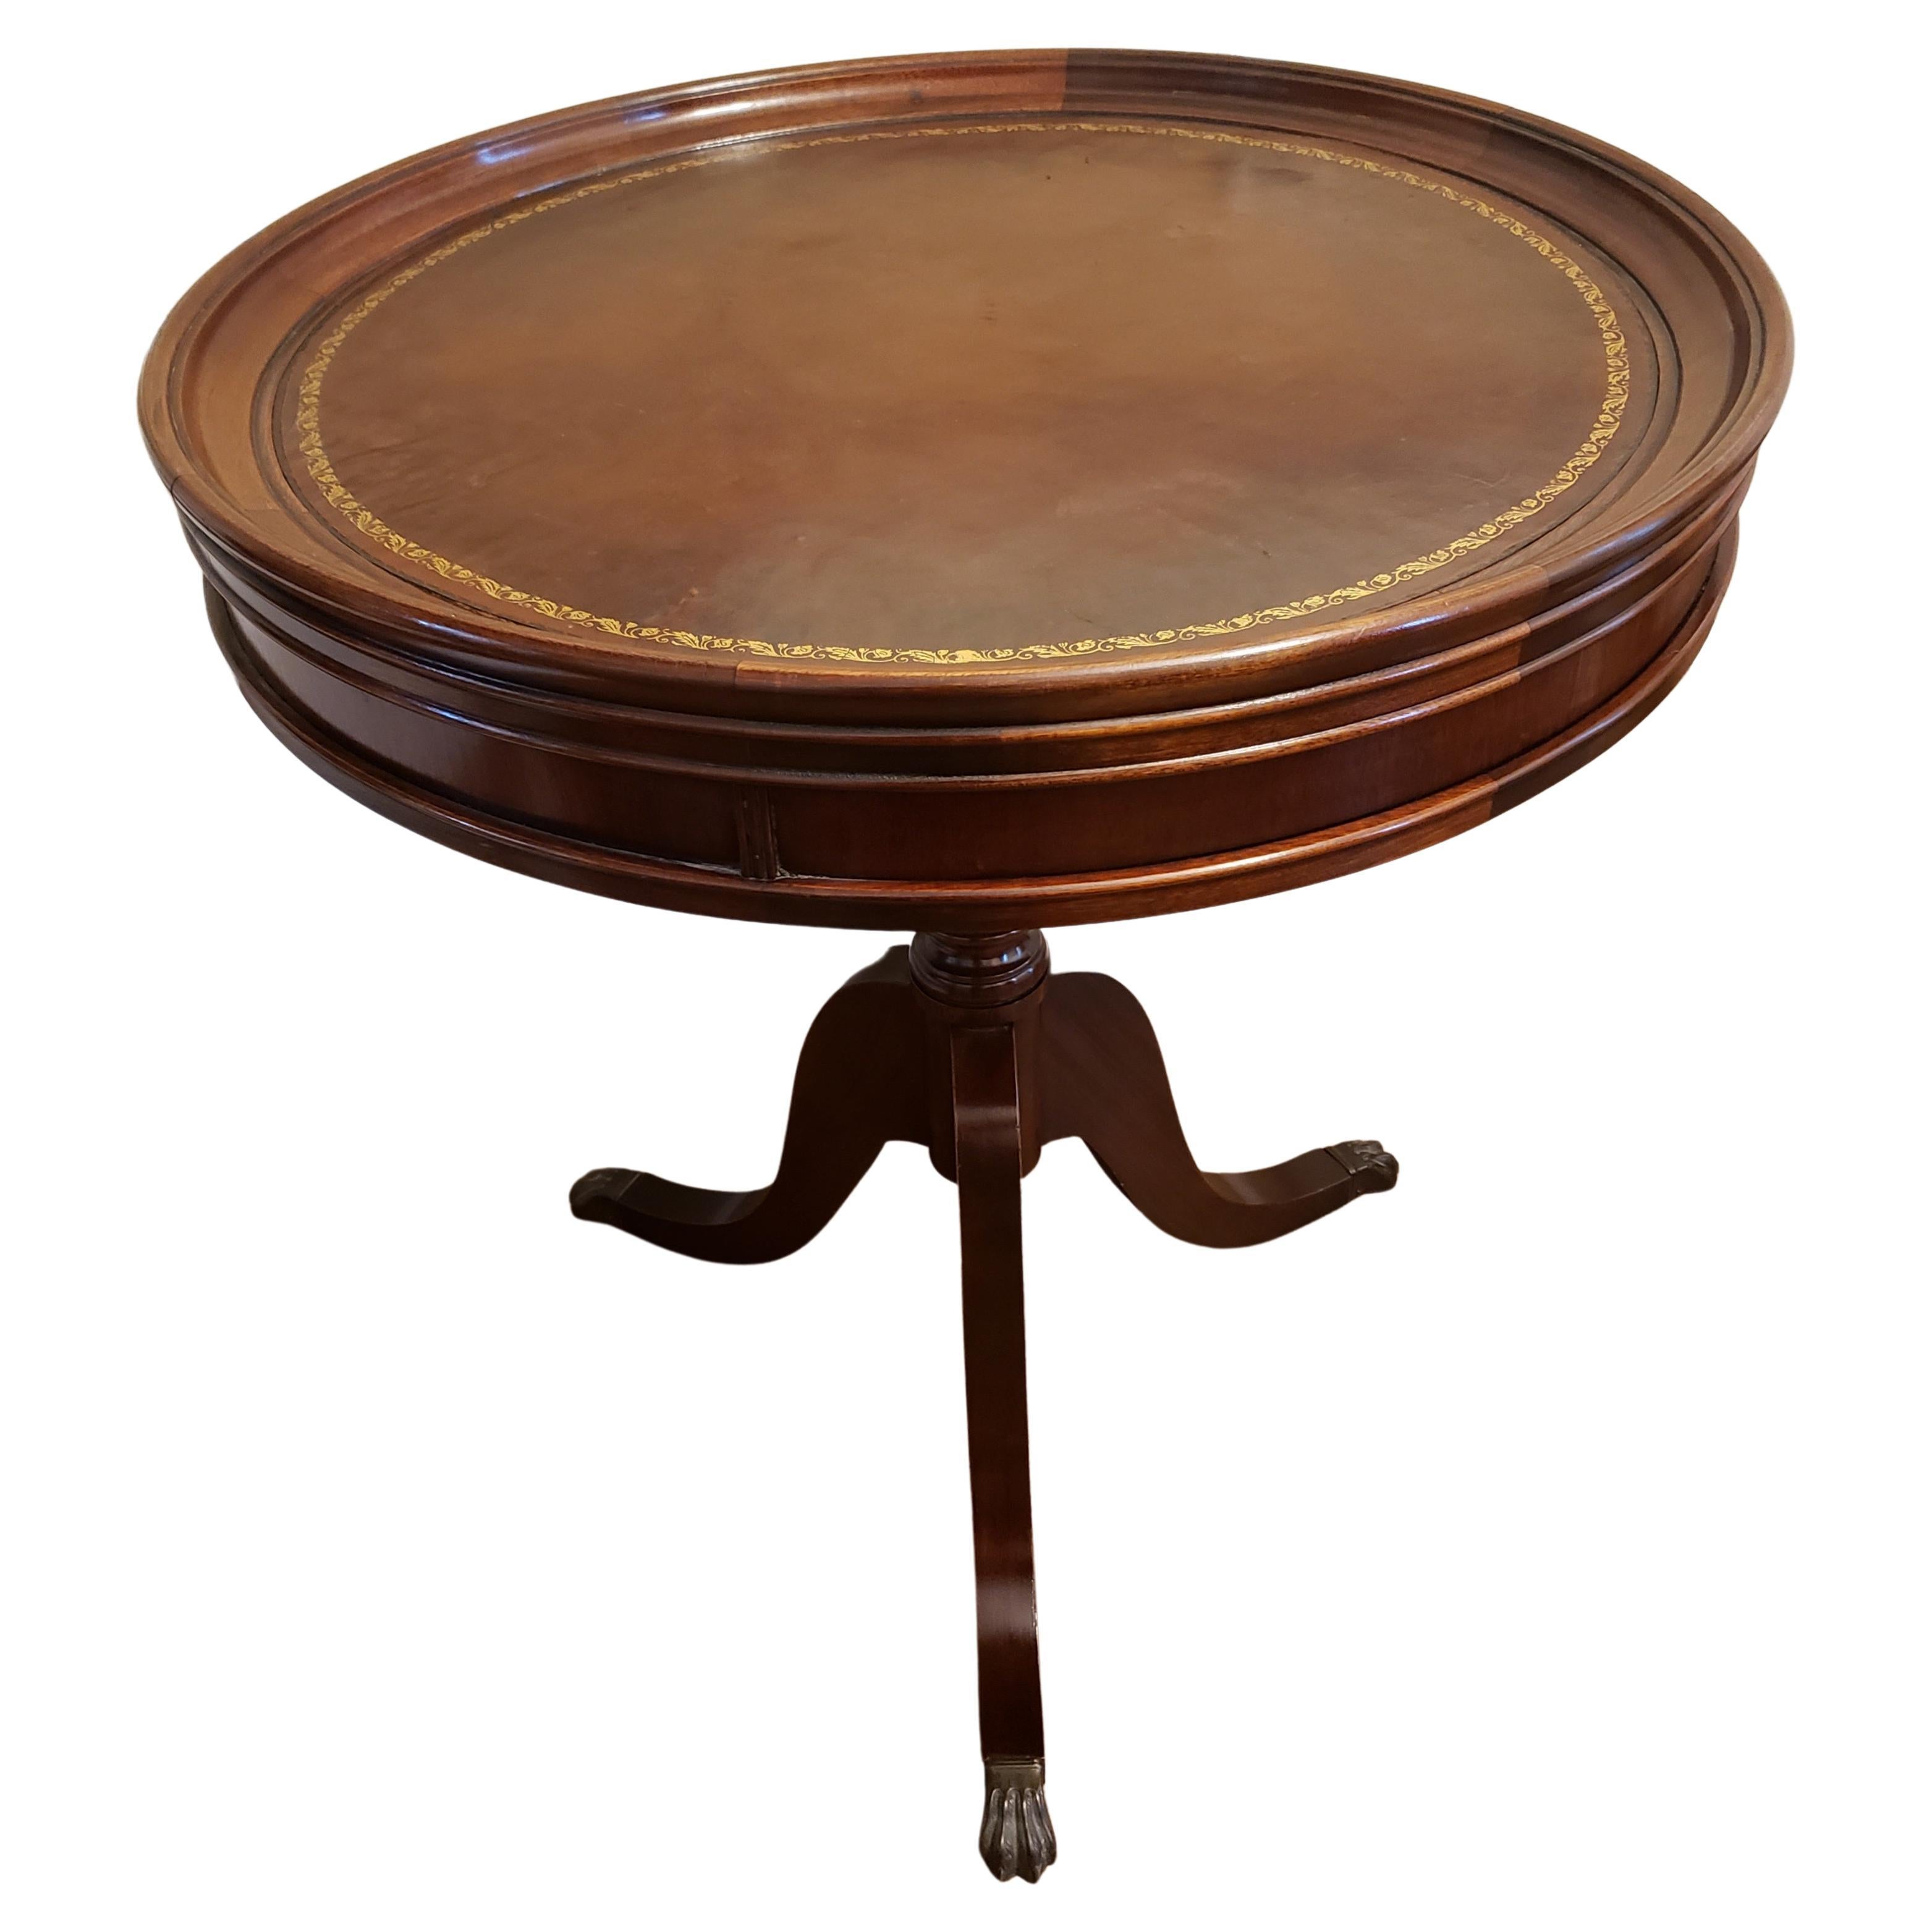 1960s Regency Mahogany and Tooled Leather Stencil Pedestal Tea Drum Table For Sale